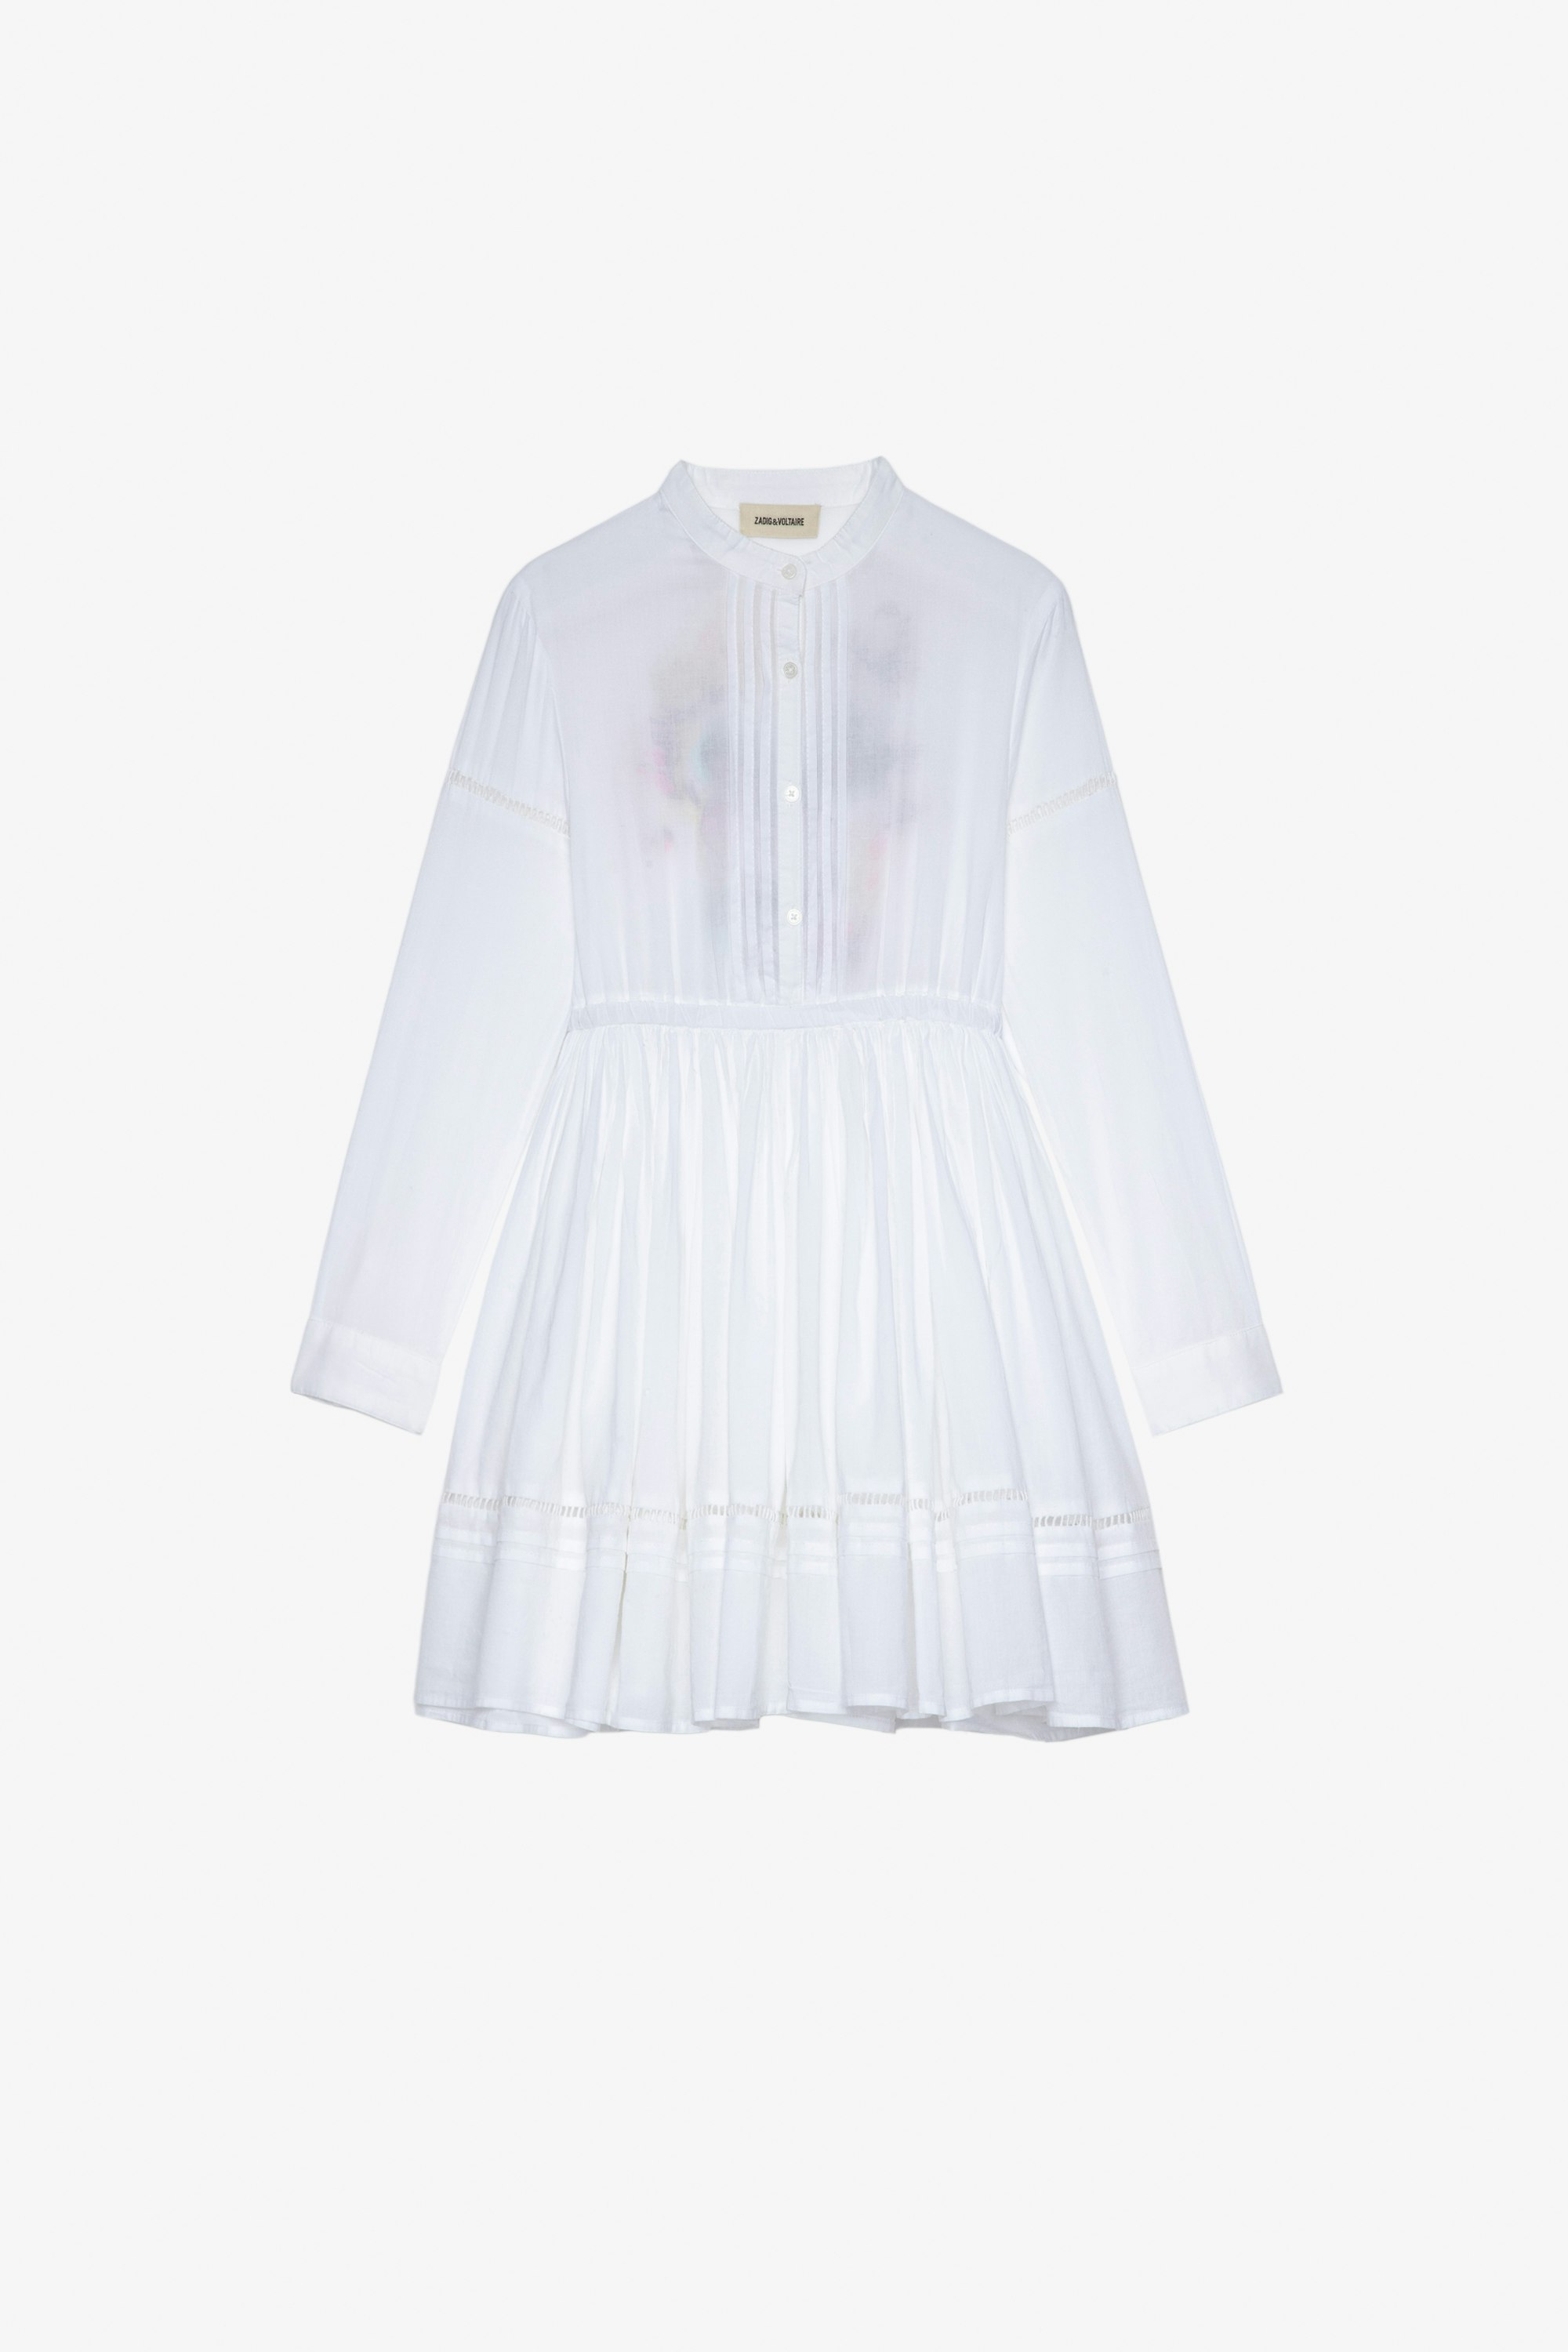 Ranila Kids’ Dress Kids' white cotton dress featuring an embroidered skull on the back